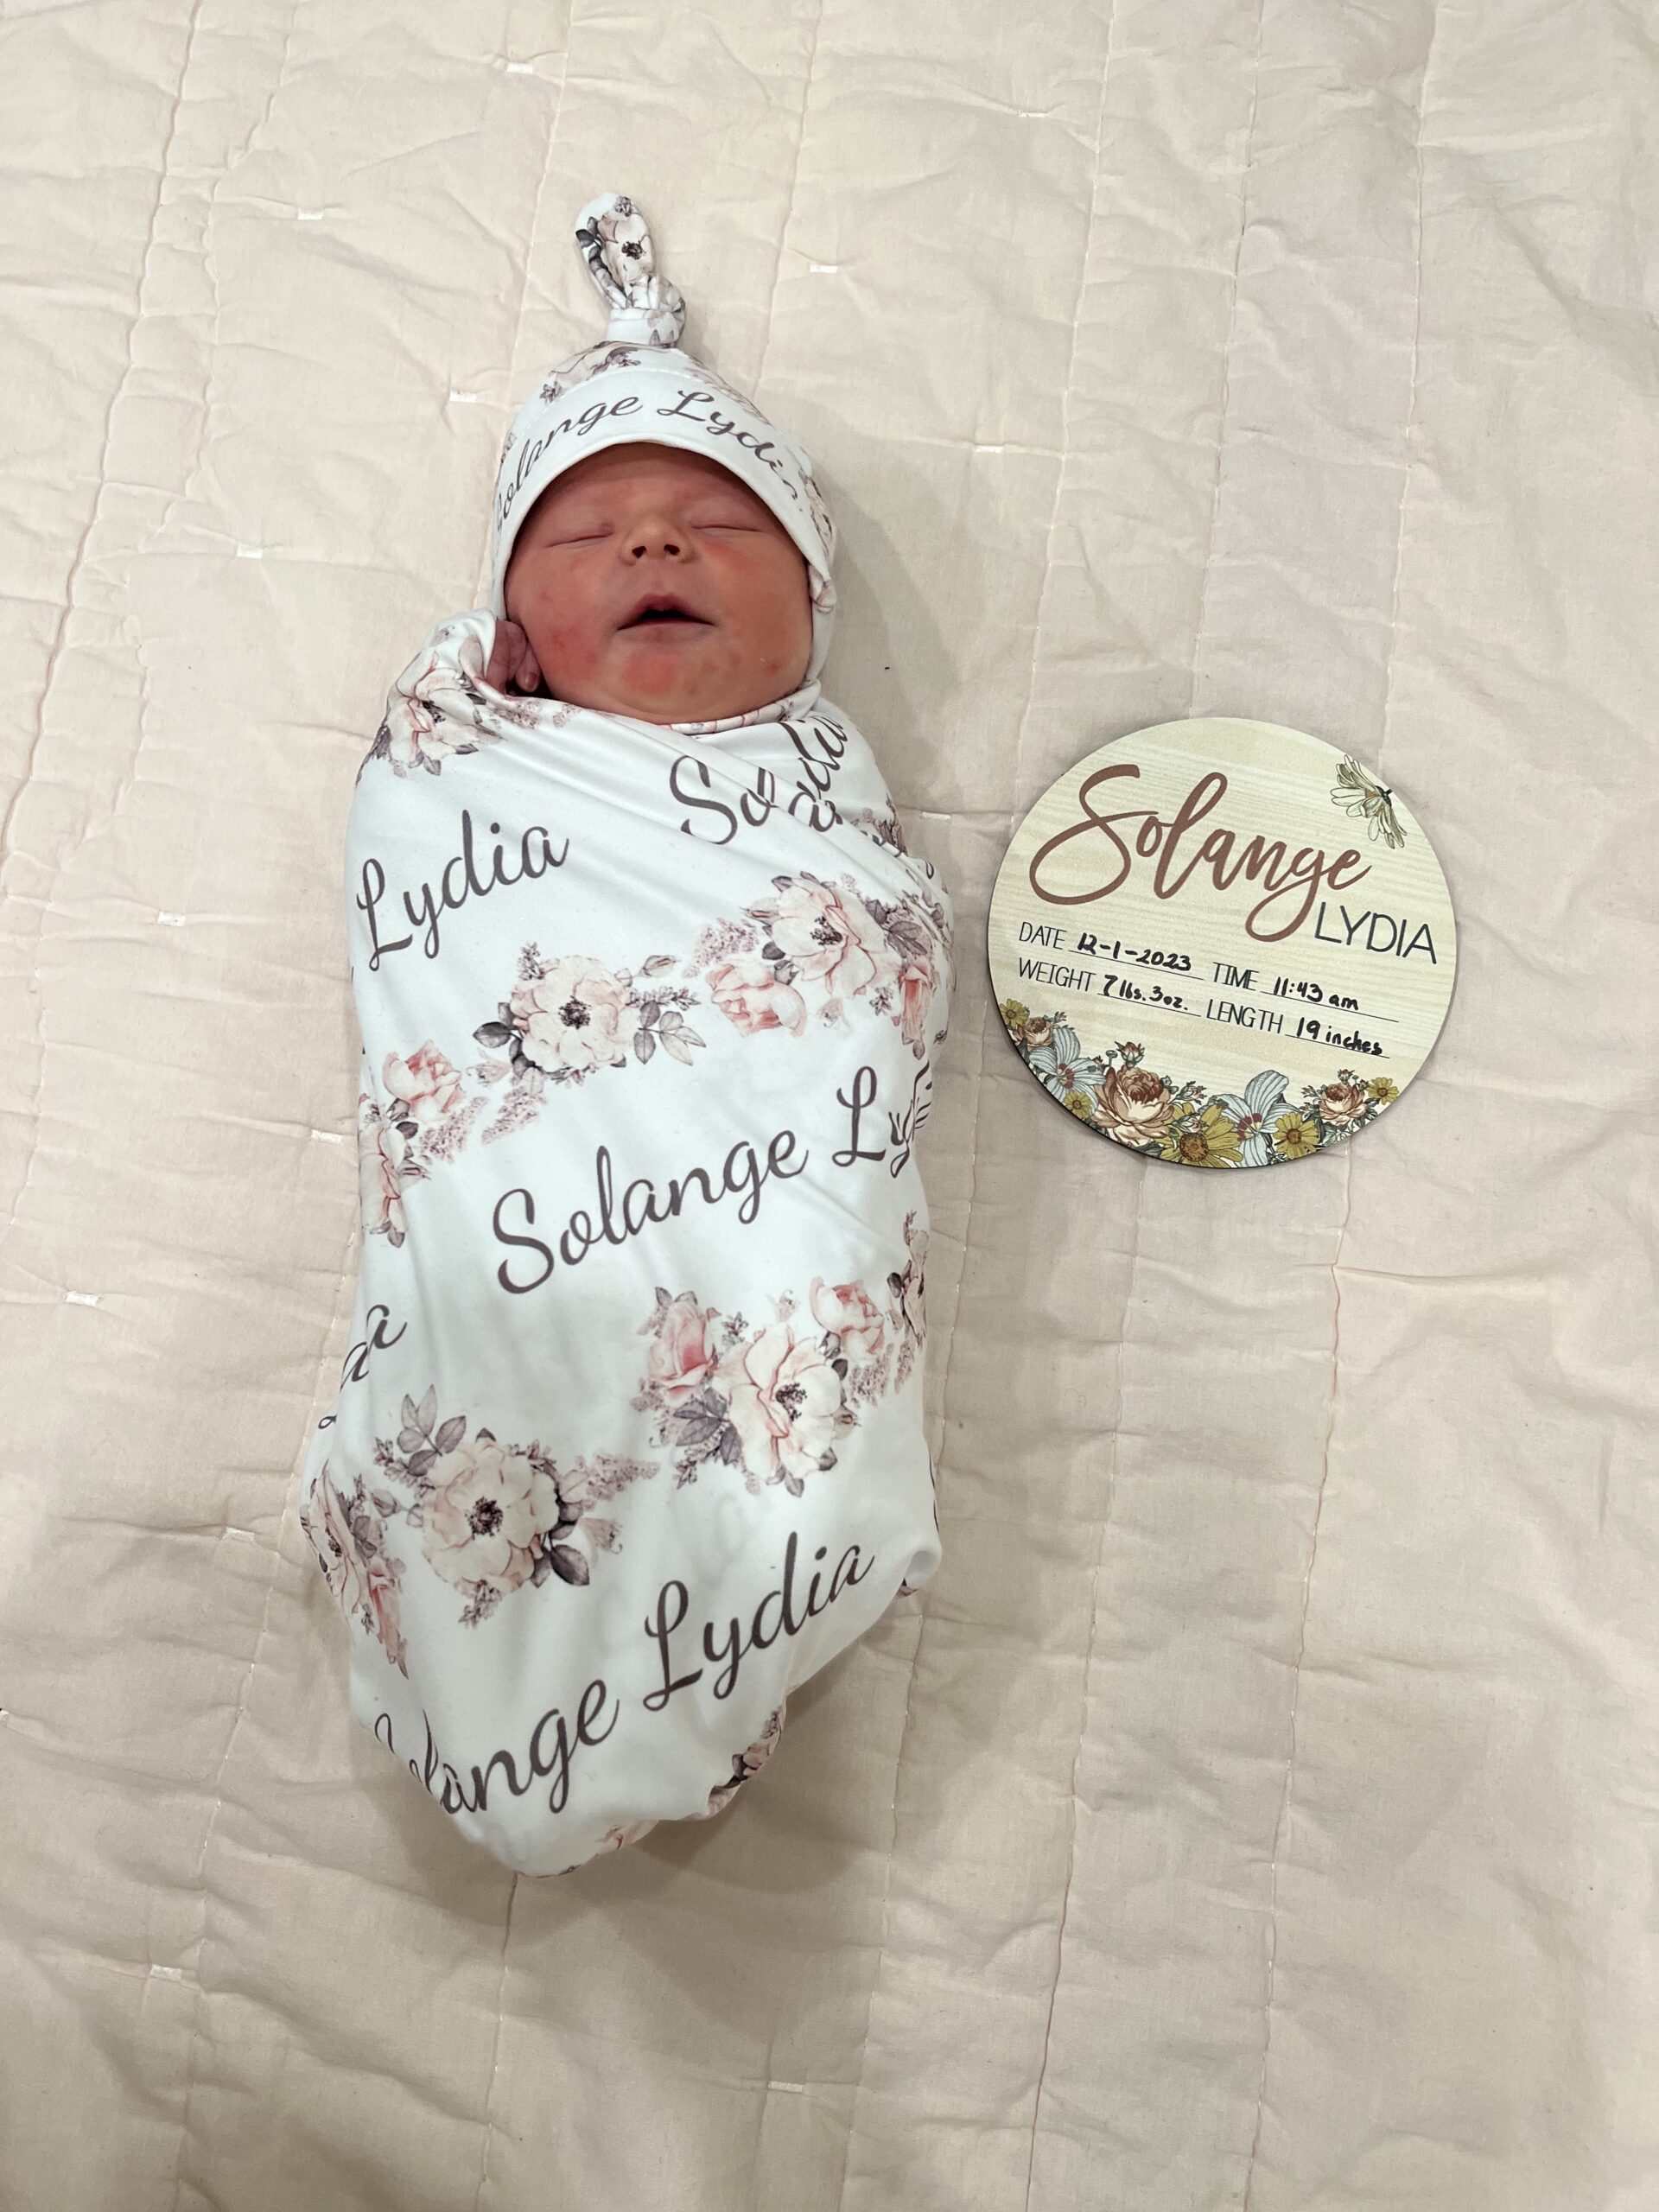 Solange Lydia just a week or two after she was born (VBAC) she's wearing a matching white swaddle and hat, monogrammed with Solange Lydia and flowers and a plaque laying next to her with her name, birth date, weight, heigh, and length written on it.